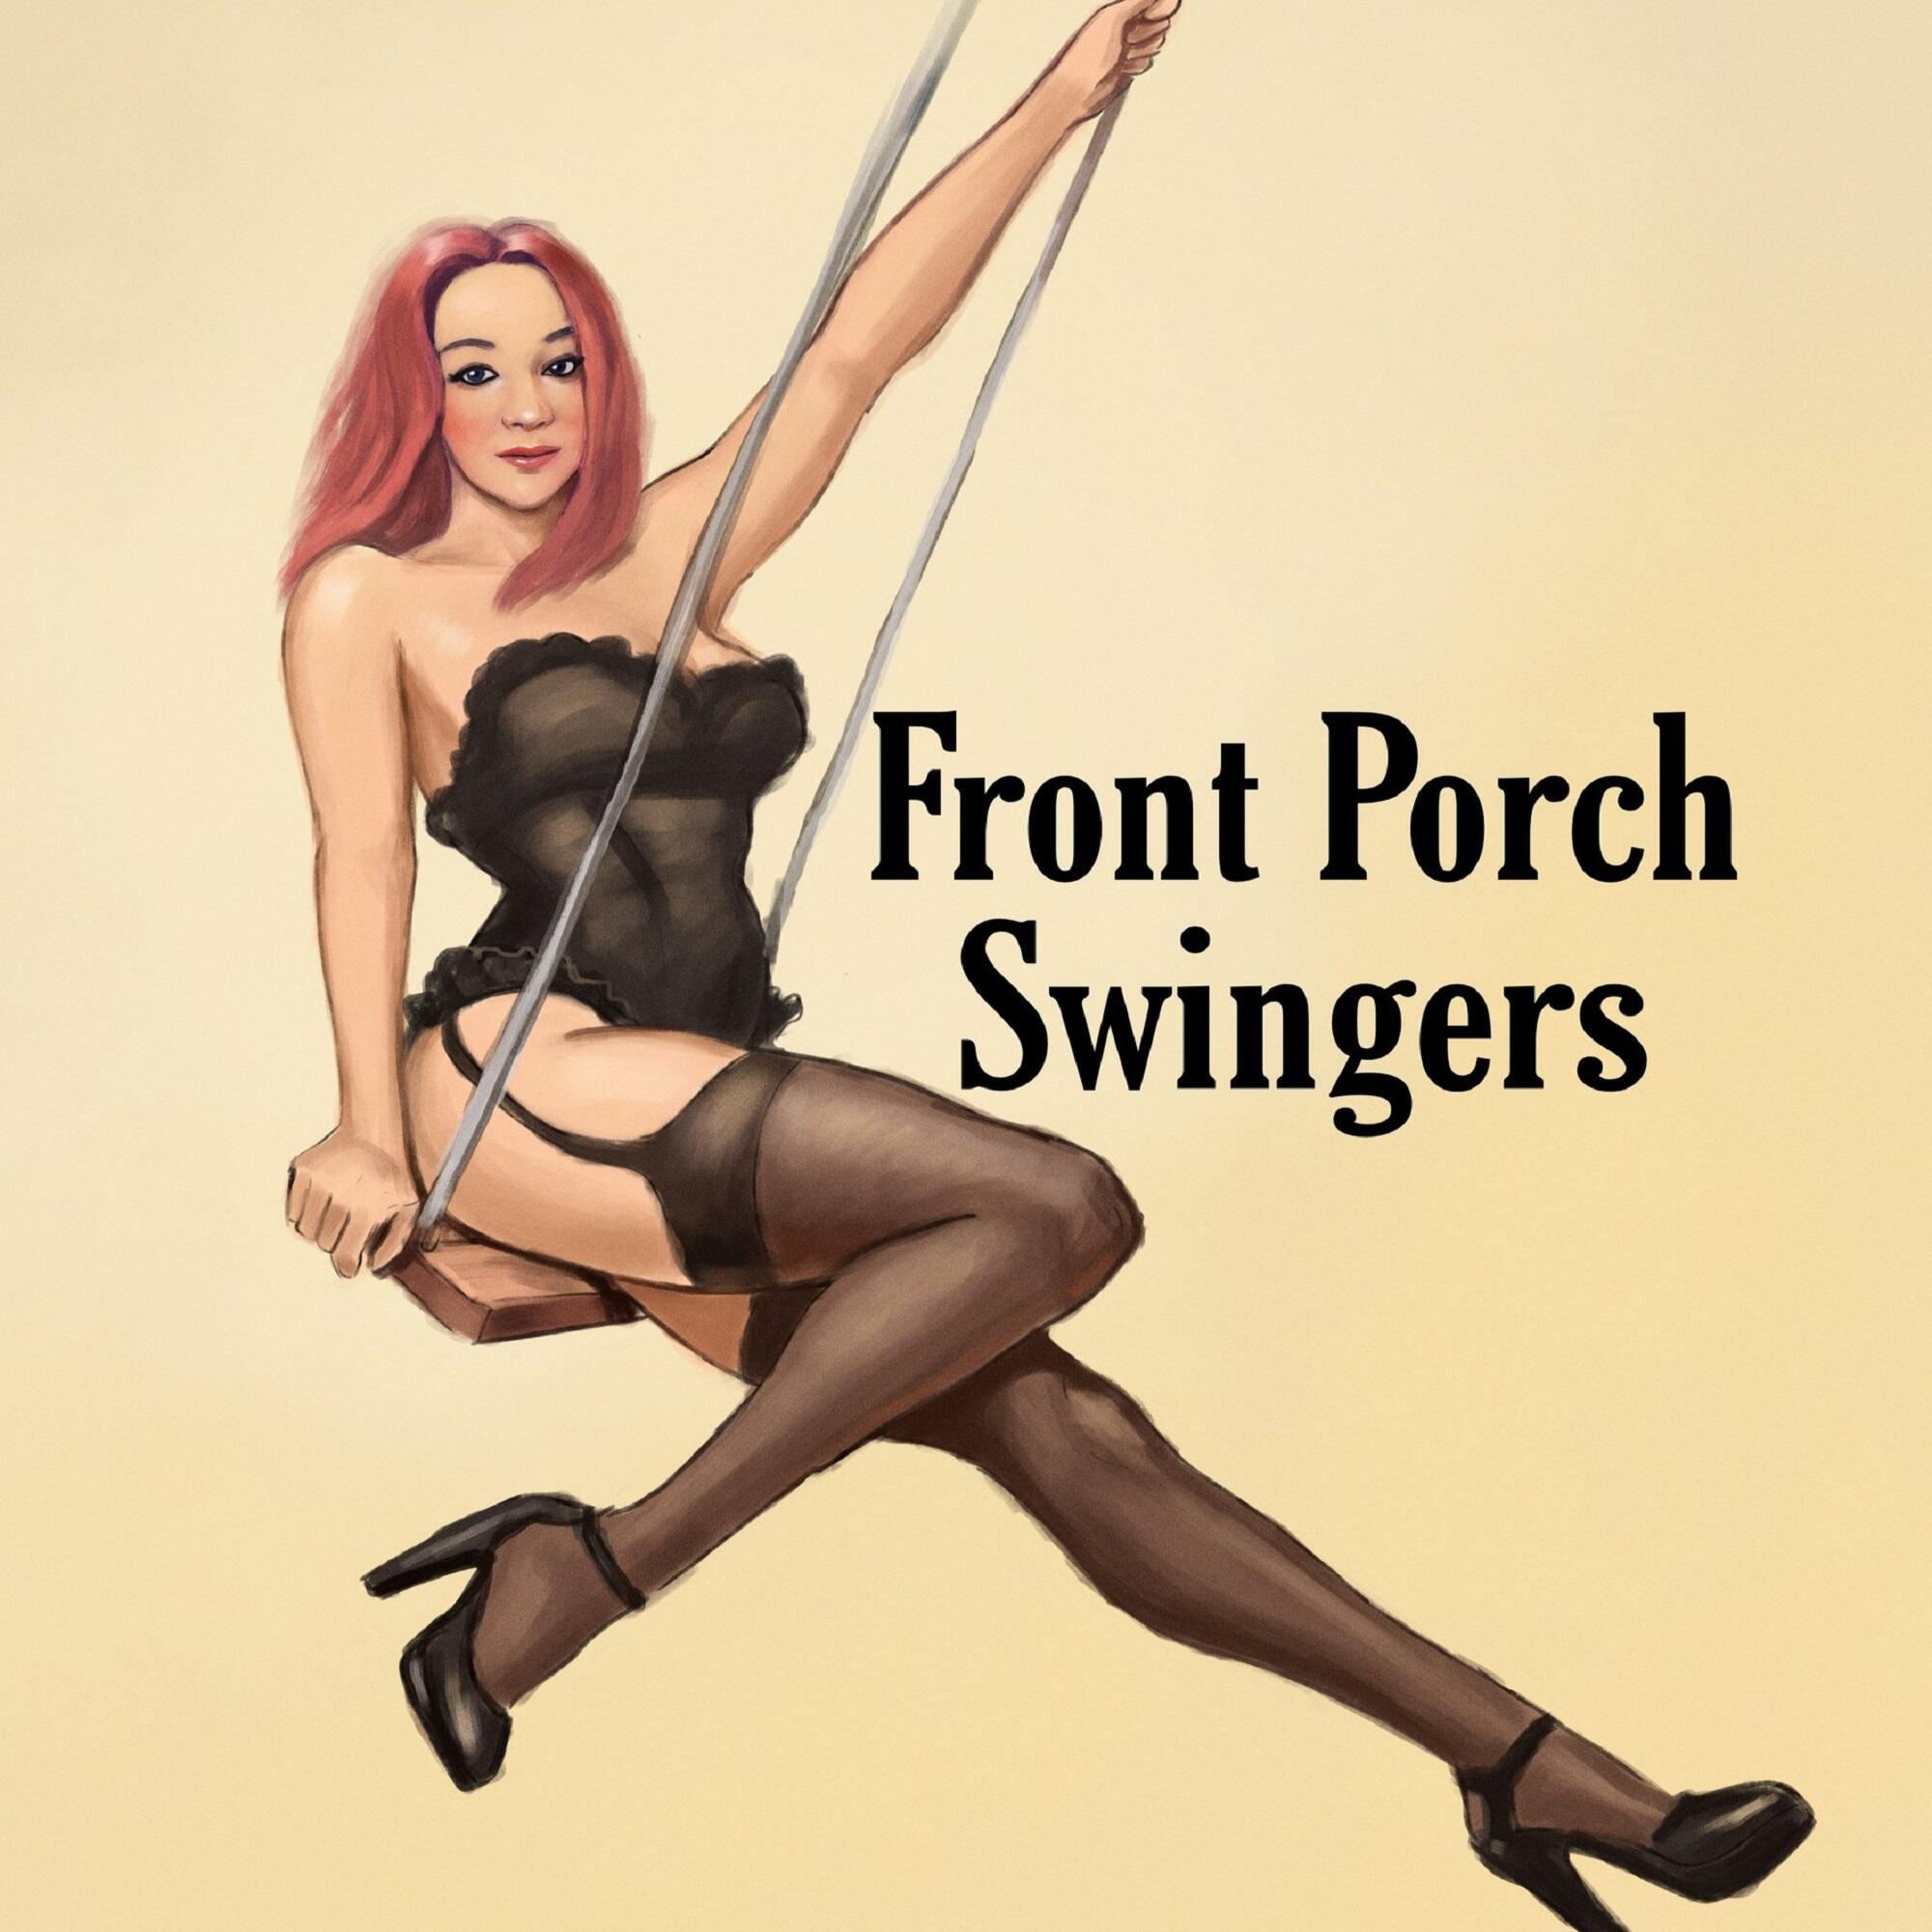 ♫ Front Porch Swingers Whats it REALLY like to be in an open relationship? Find out as we re-tell our real-life adventures as swingers! From Brennas hotwife encounters to Brians solo